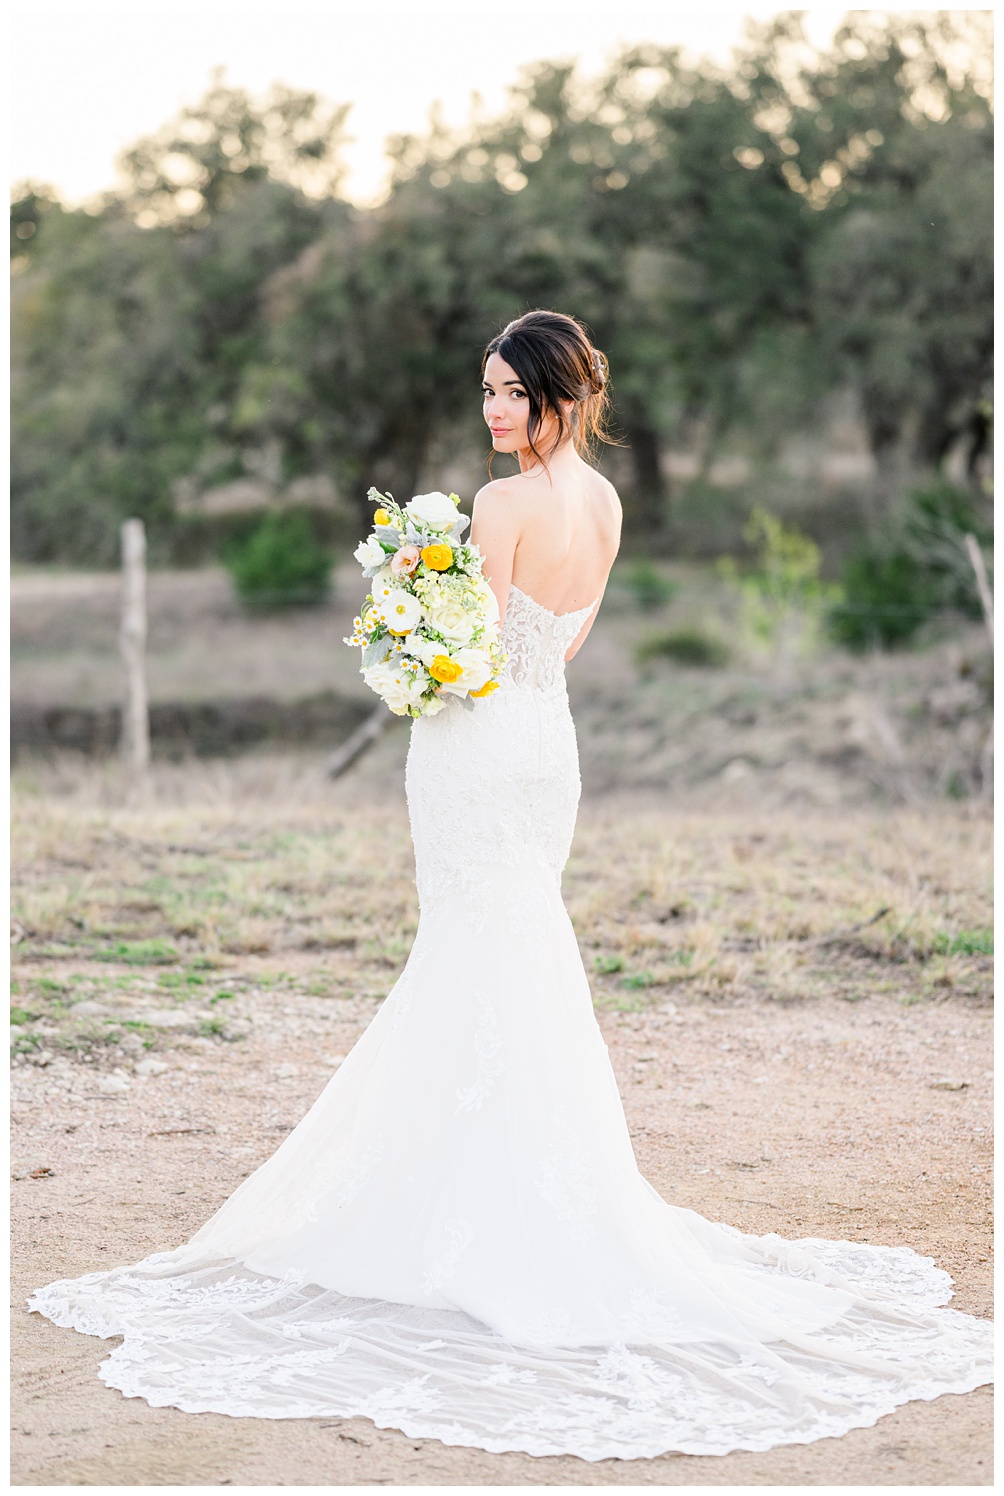 Cassidy Elise Artistry on location hair and makeup for Austin brides